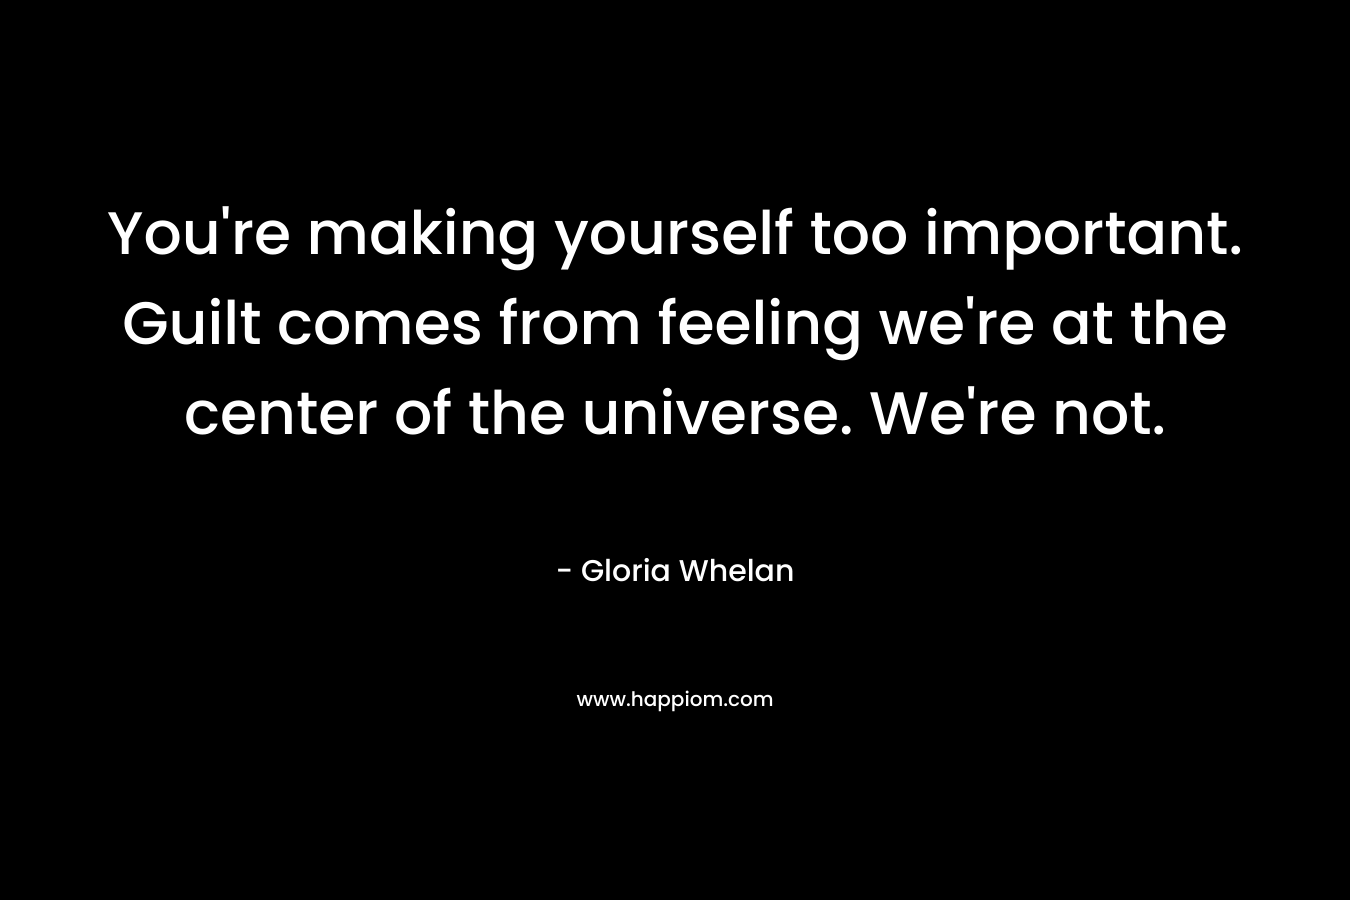 You’re making yourself too important. Guilt comes from feeling we’re at the center of the universe. We’re not. – Gloria Whelan